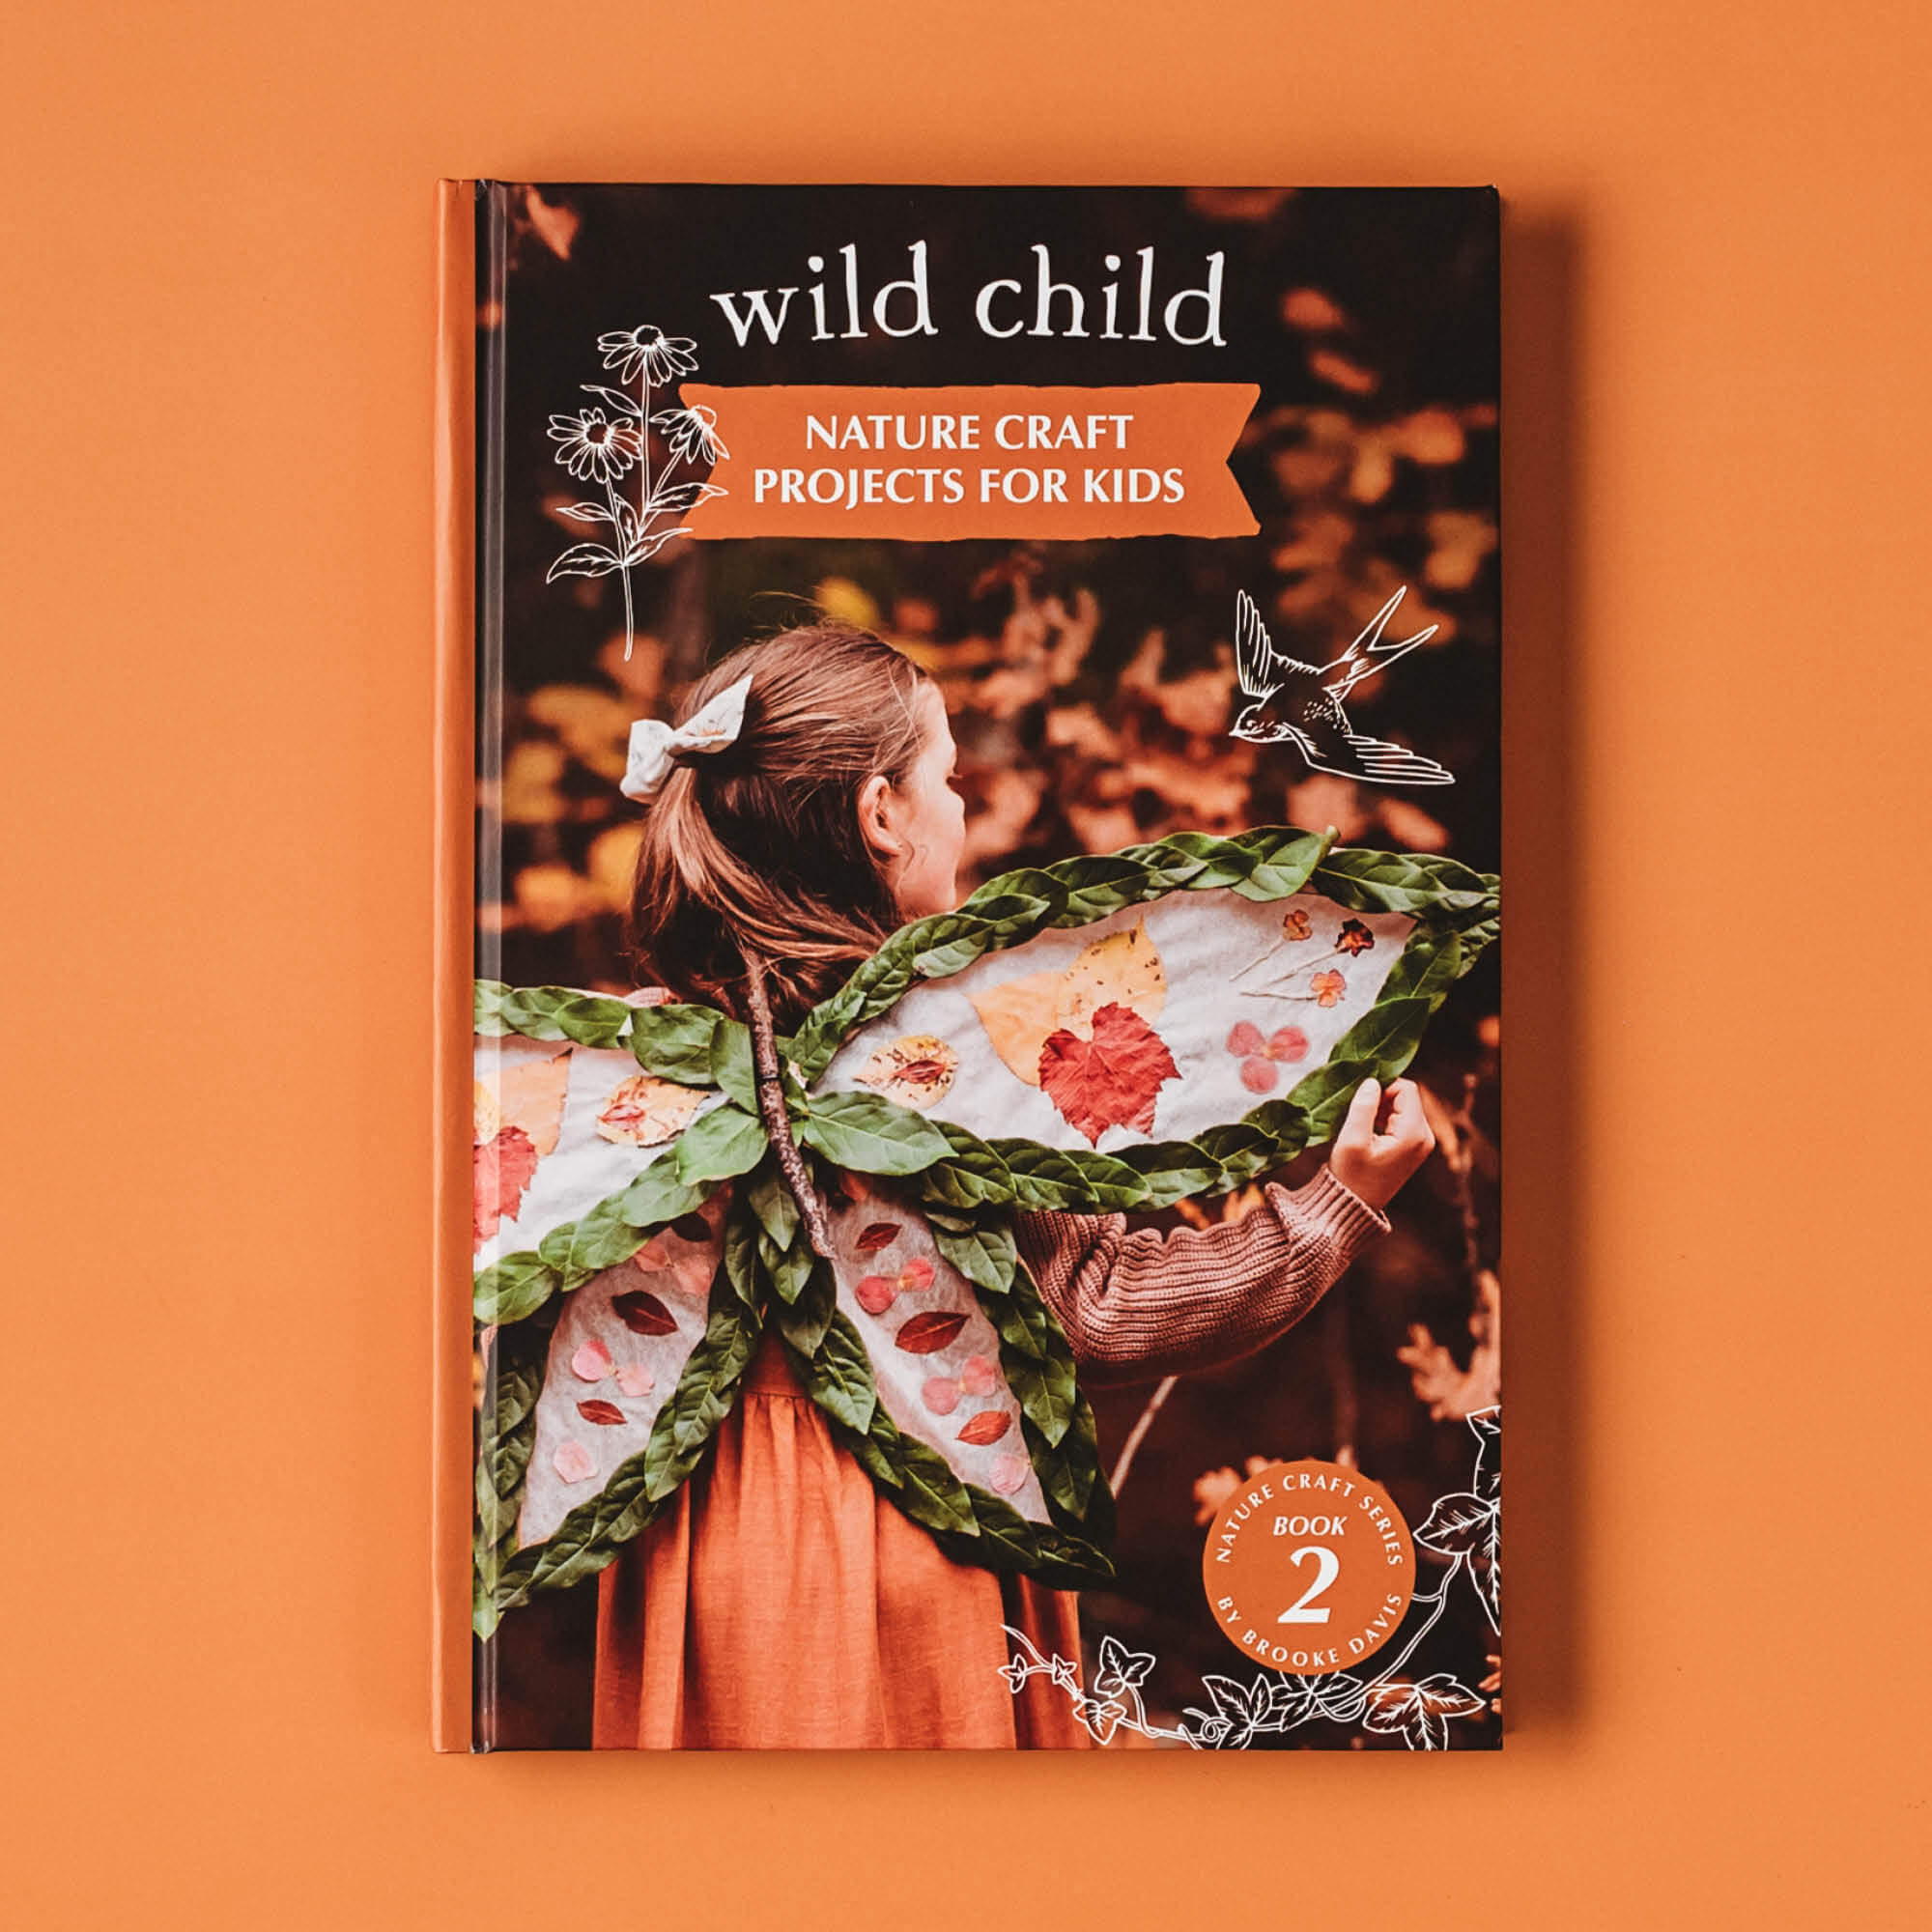 Wild Child featured in Nature Craft Starter Pack from Your Wild Books includes Wild Imagination book, Wild Child book, paint pens in classic colours and an opinel beginners whittling knife. Save 20%